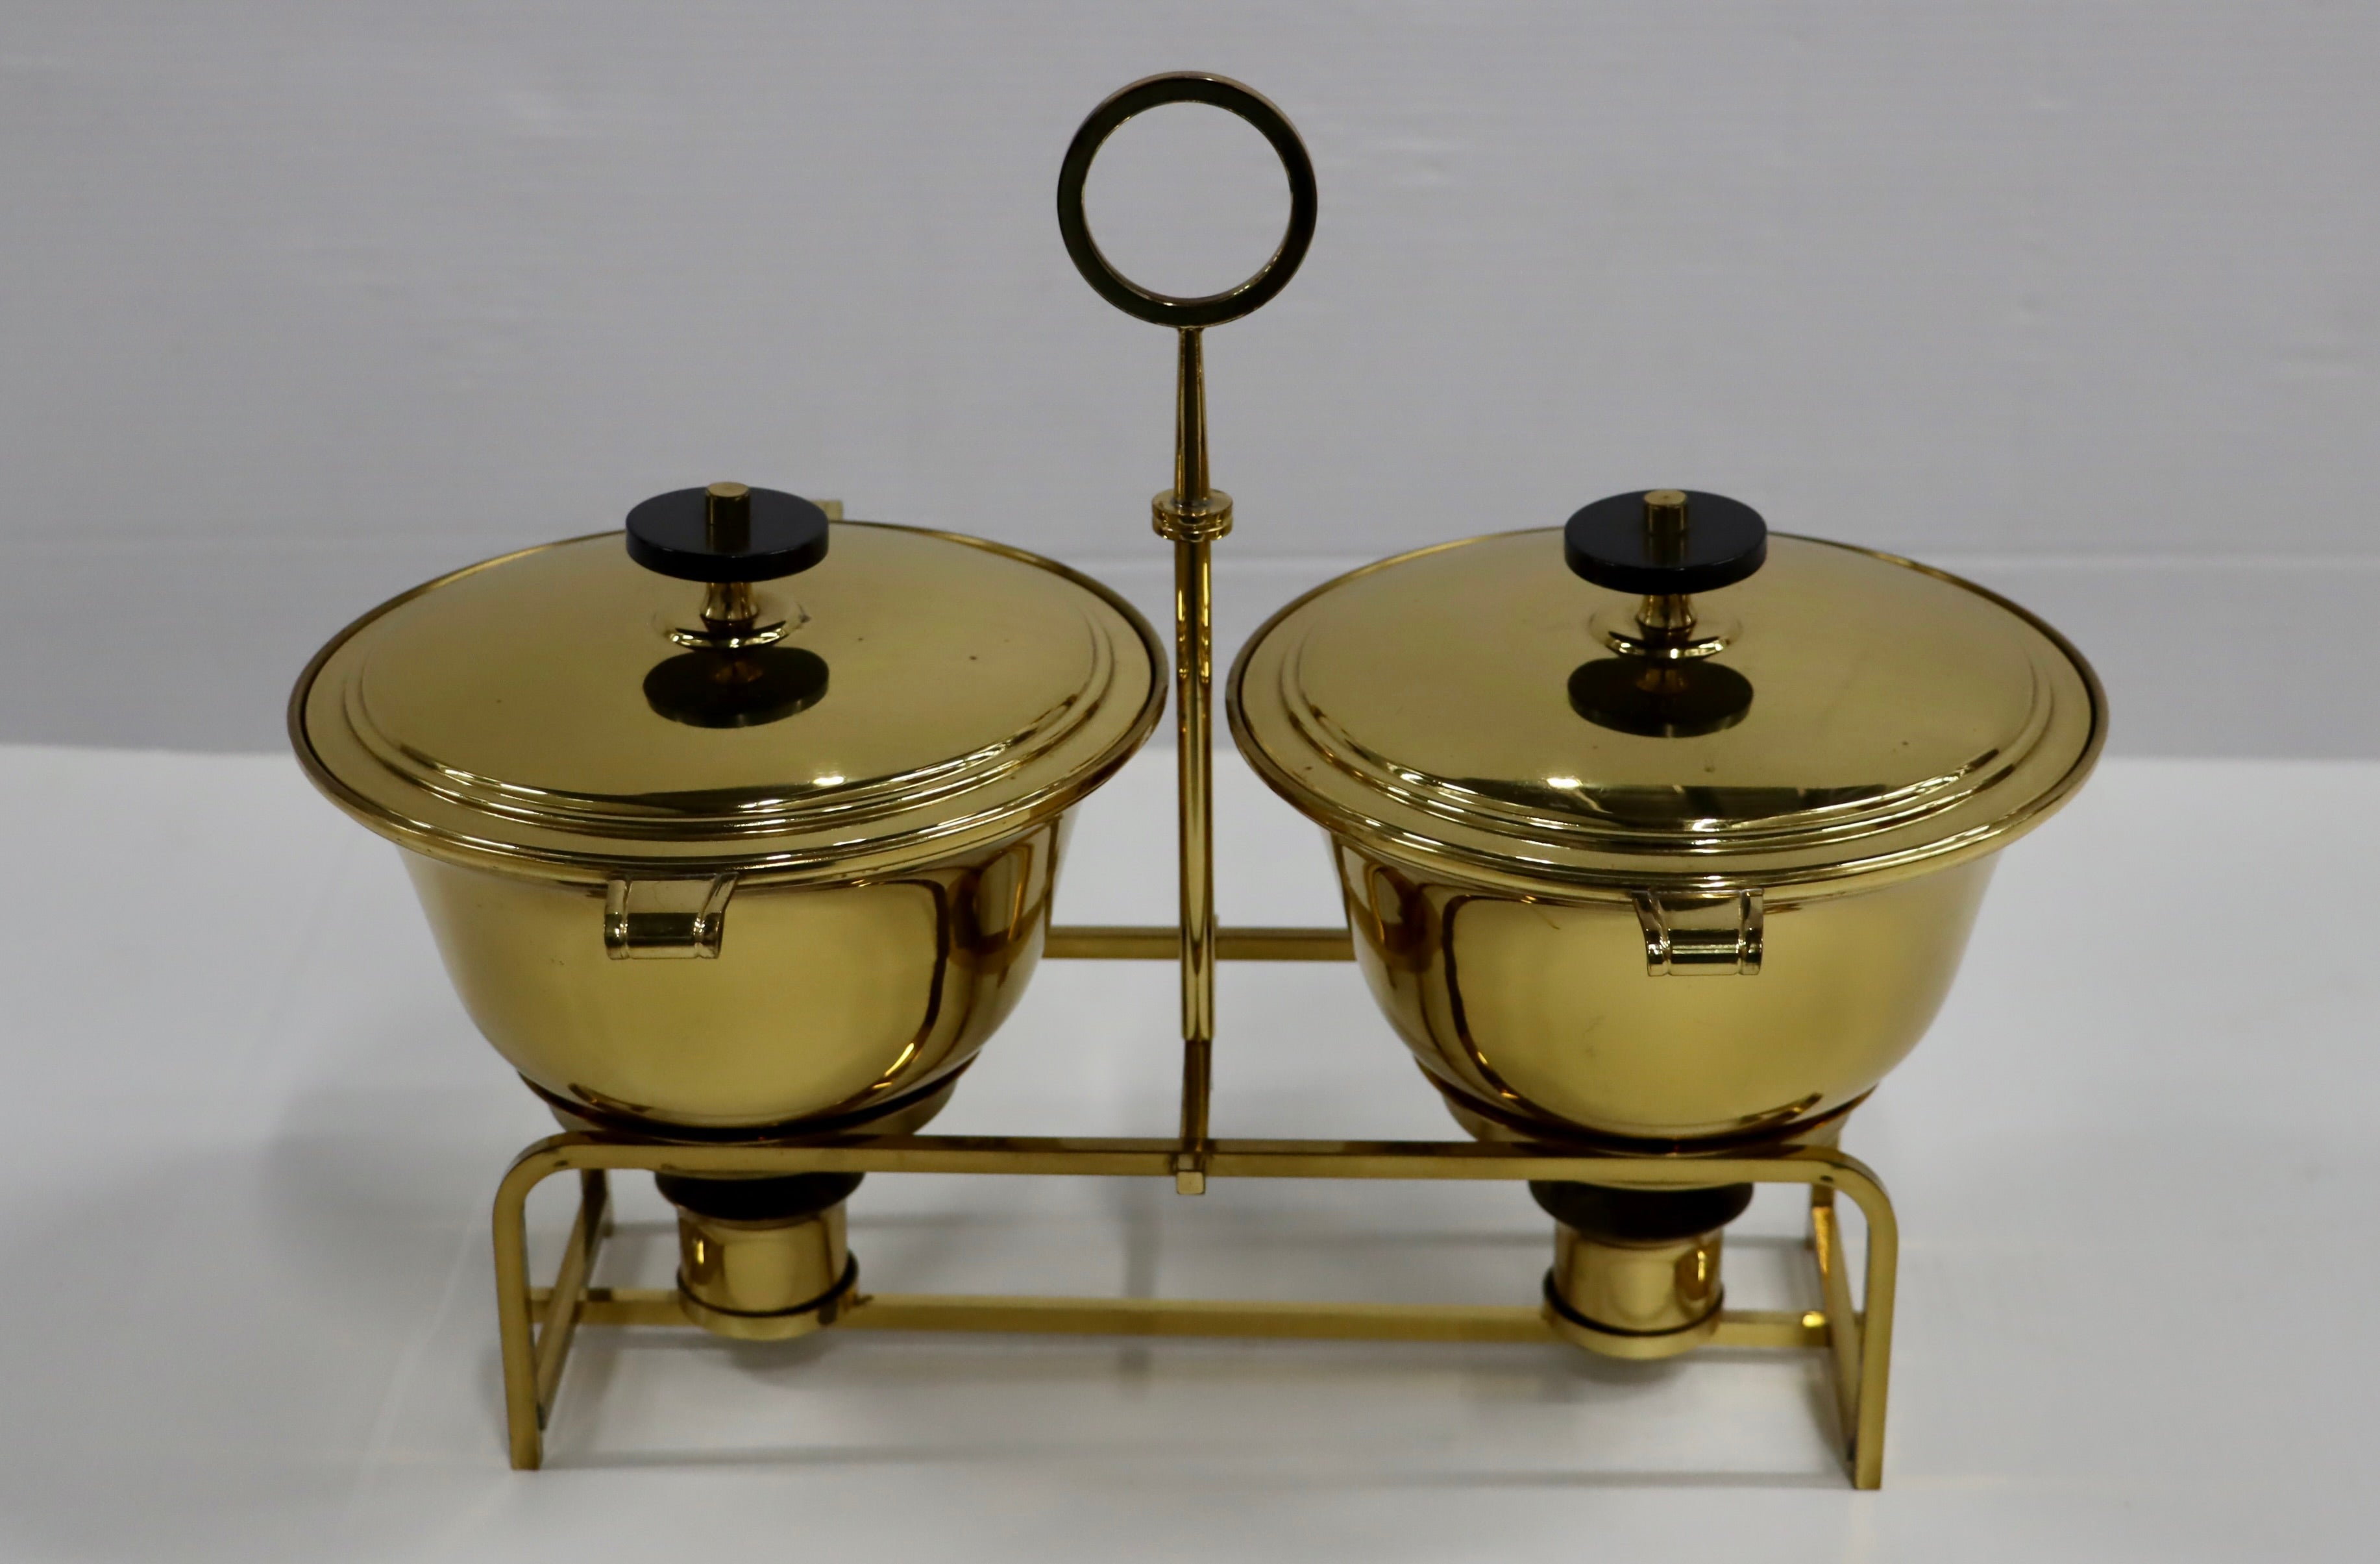 1950's brass double chafing designed by Tommi Parzinger for Dorlyn Silversmiths, in vintage original condition with some wear and patina due to age and use.